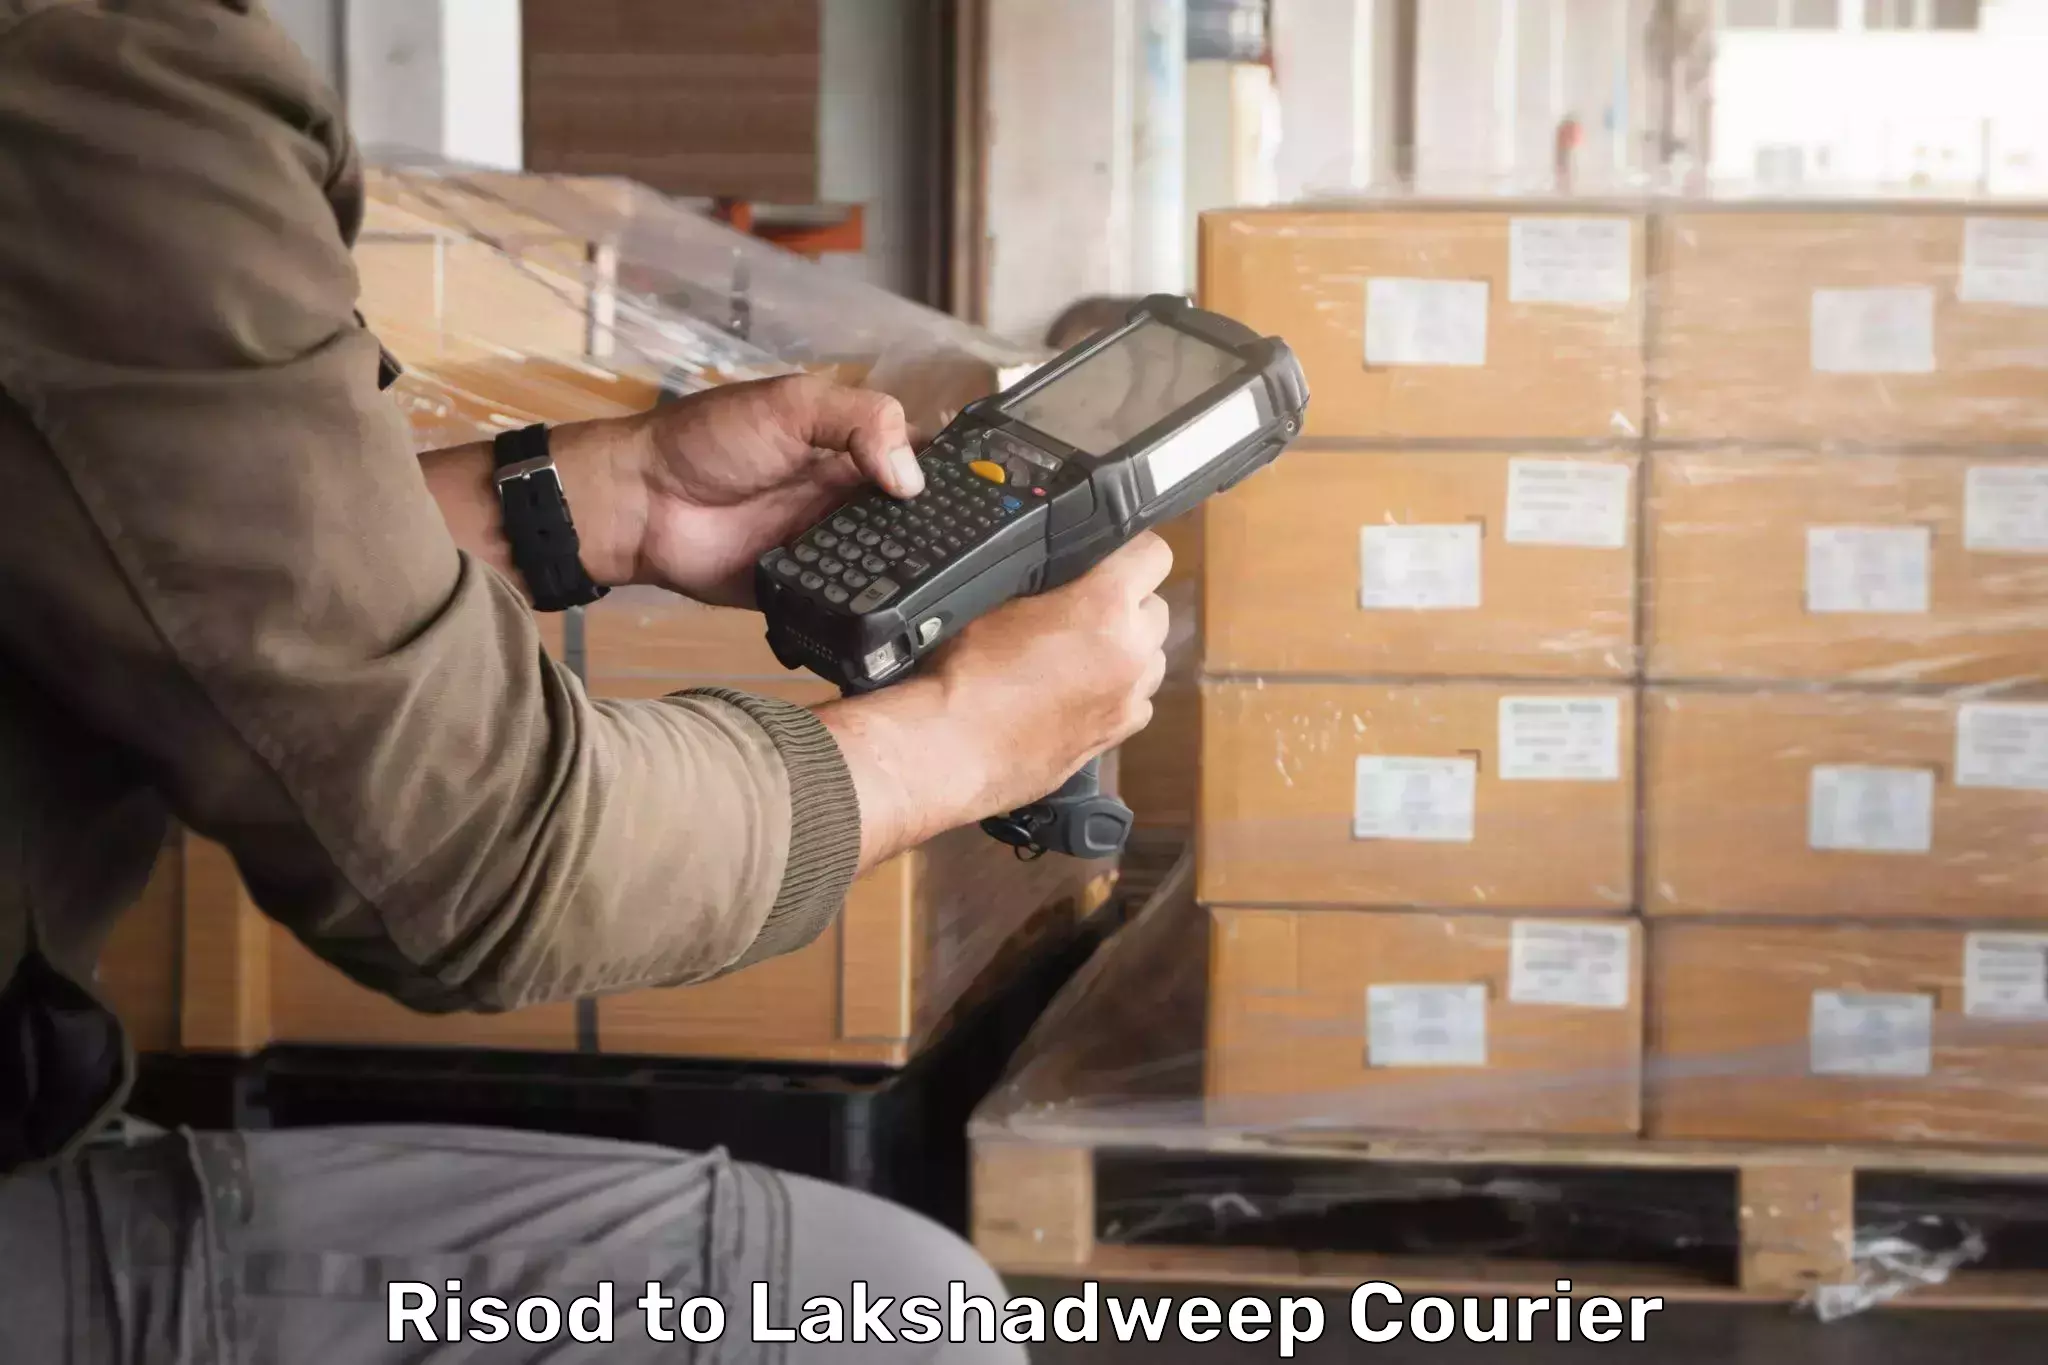 Pharmaceutical courier Risod to Lakshadweep